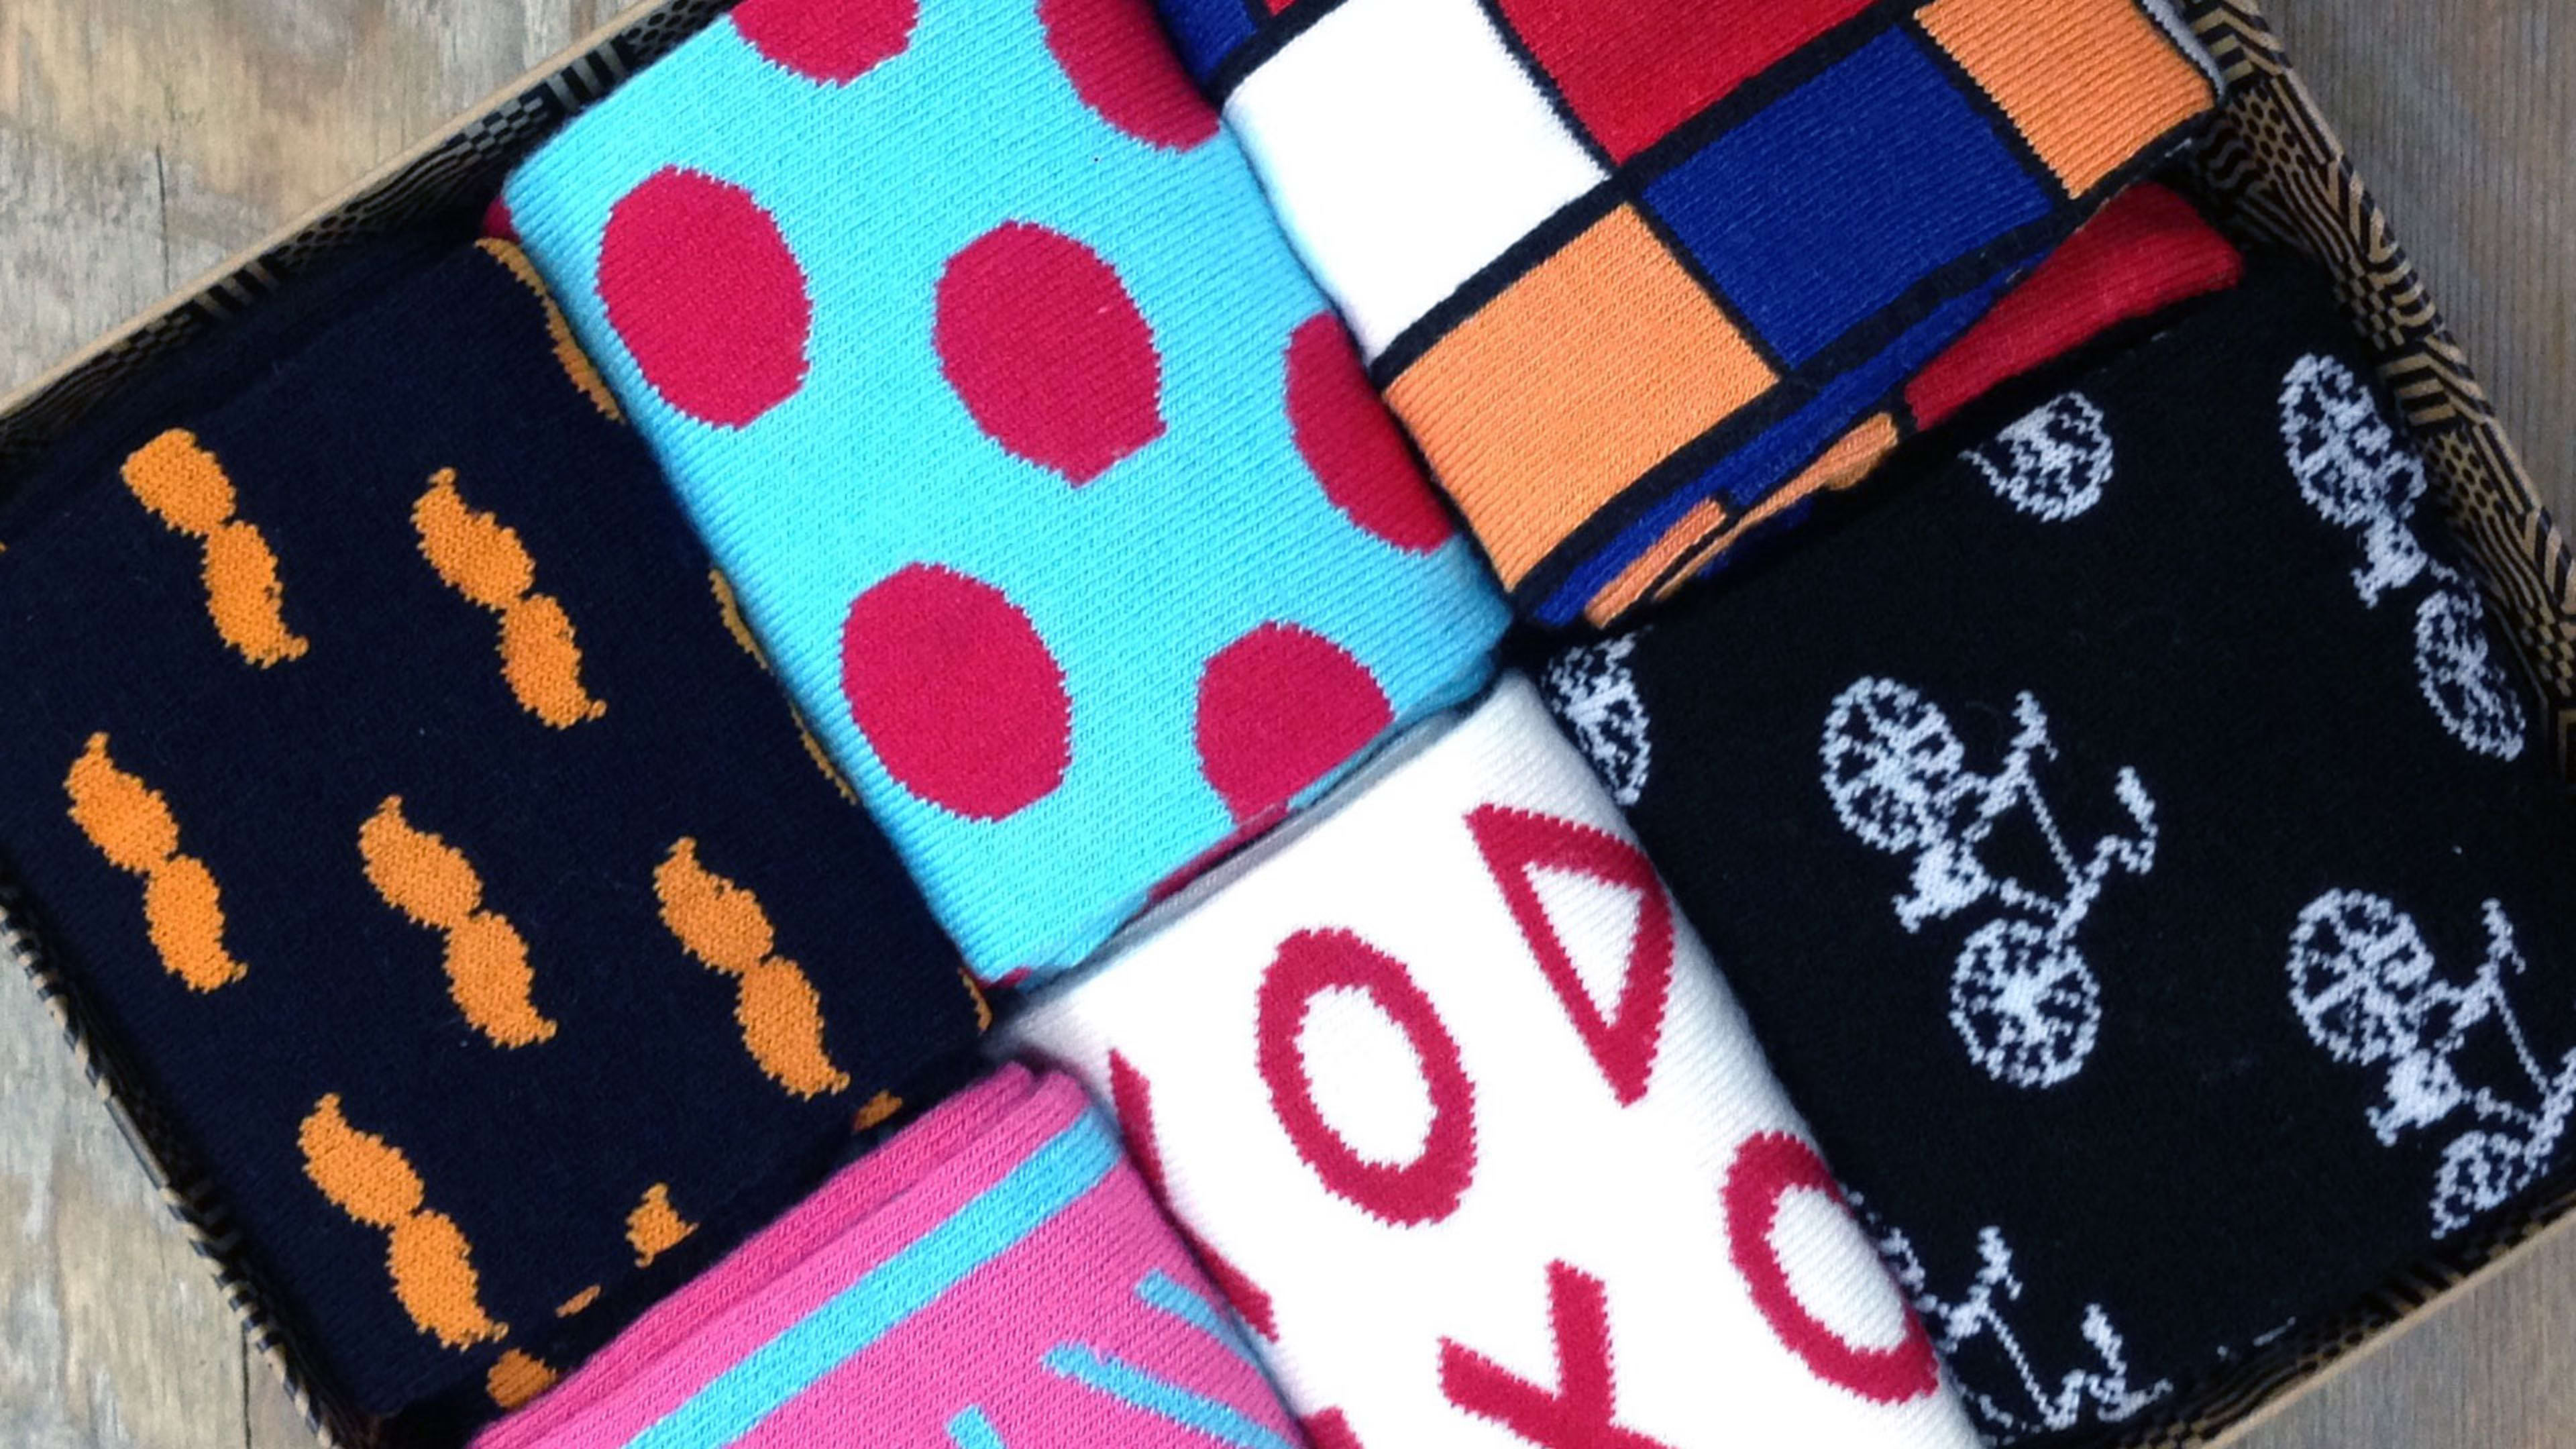 There’s a global sock shortage. This brand wants to fix it